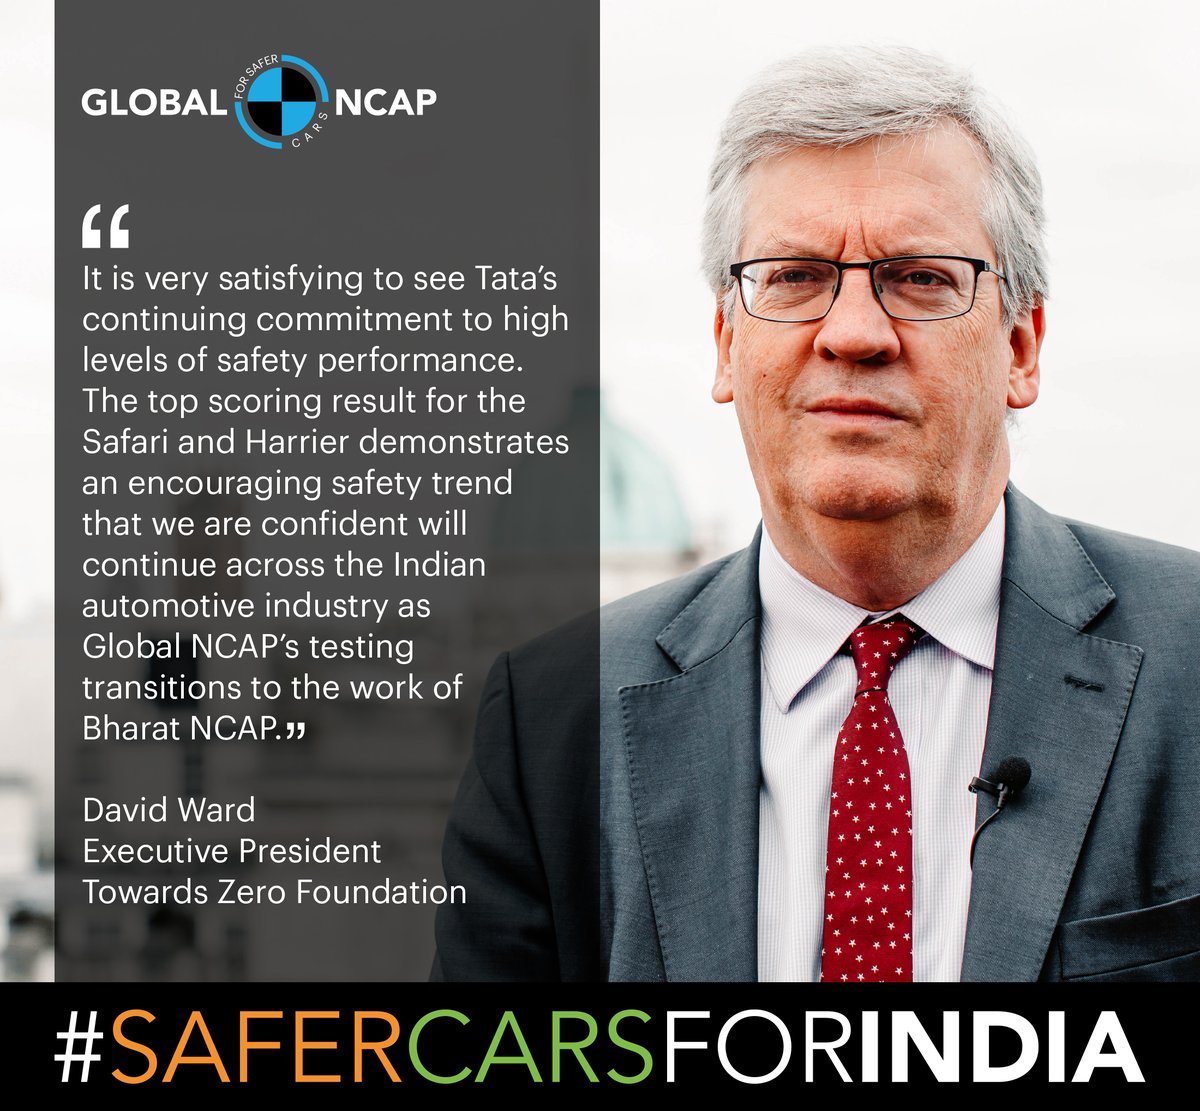 “It’s very satisfying to see Tata’s continuing commitment to high levels of safety. The top scoring result demonstrates an encouraging safety trend that we’re confident will continue as Global NCAP’s testing transitions to the work of Bharat NCAP.” @DavidDjward @TowardsZeroFdn.